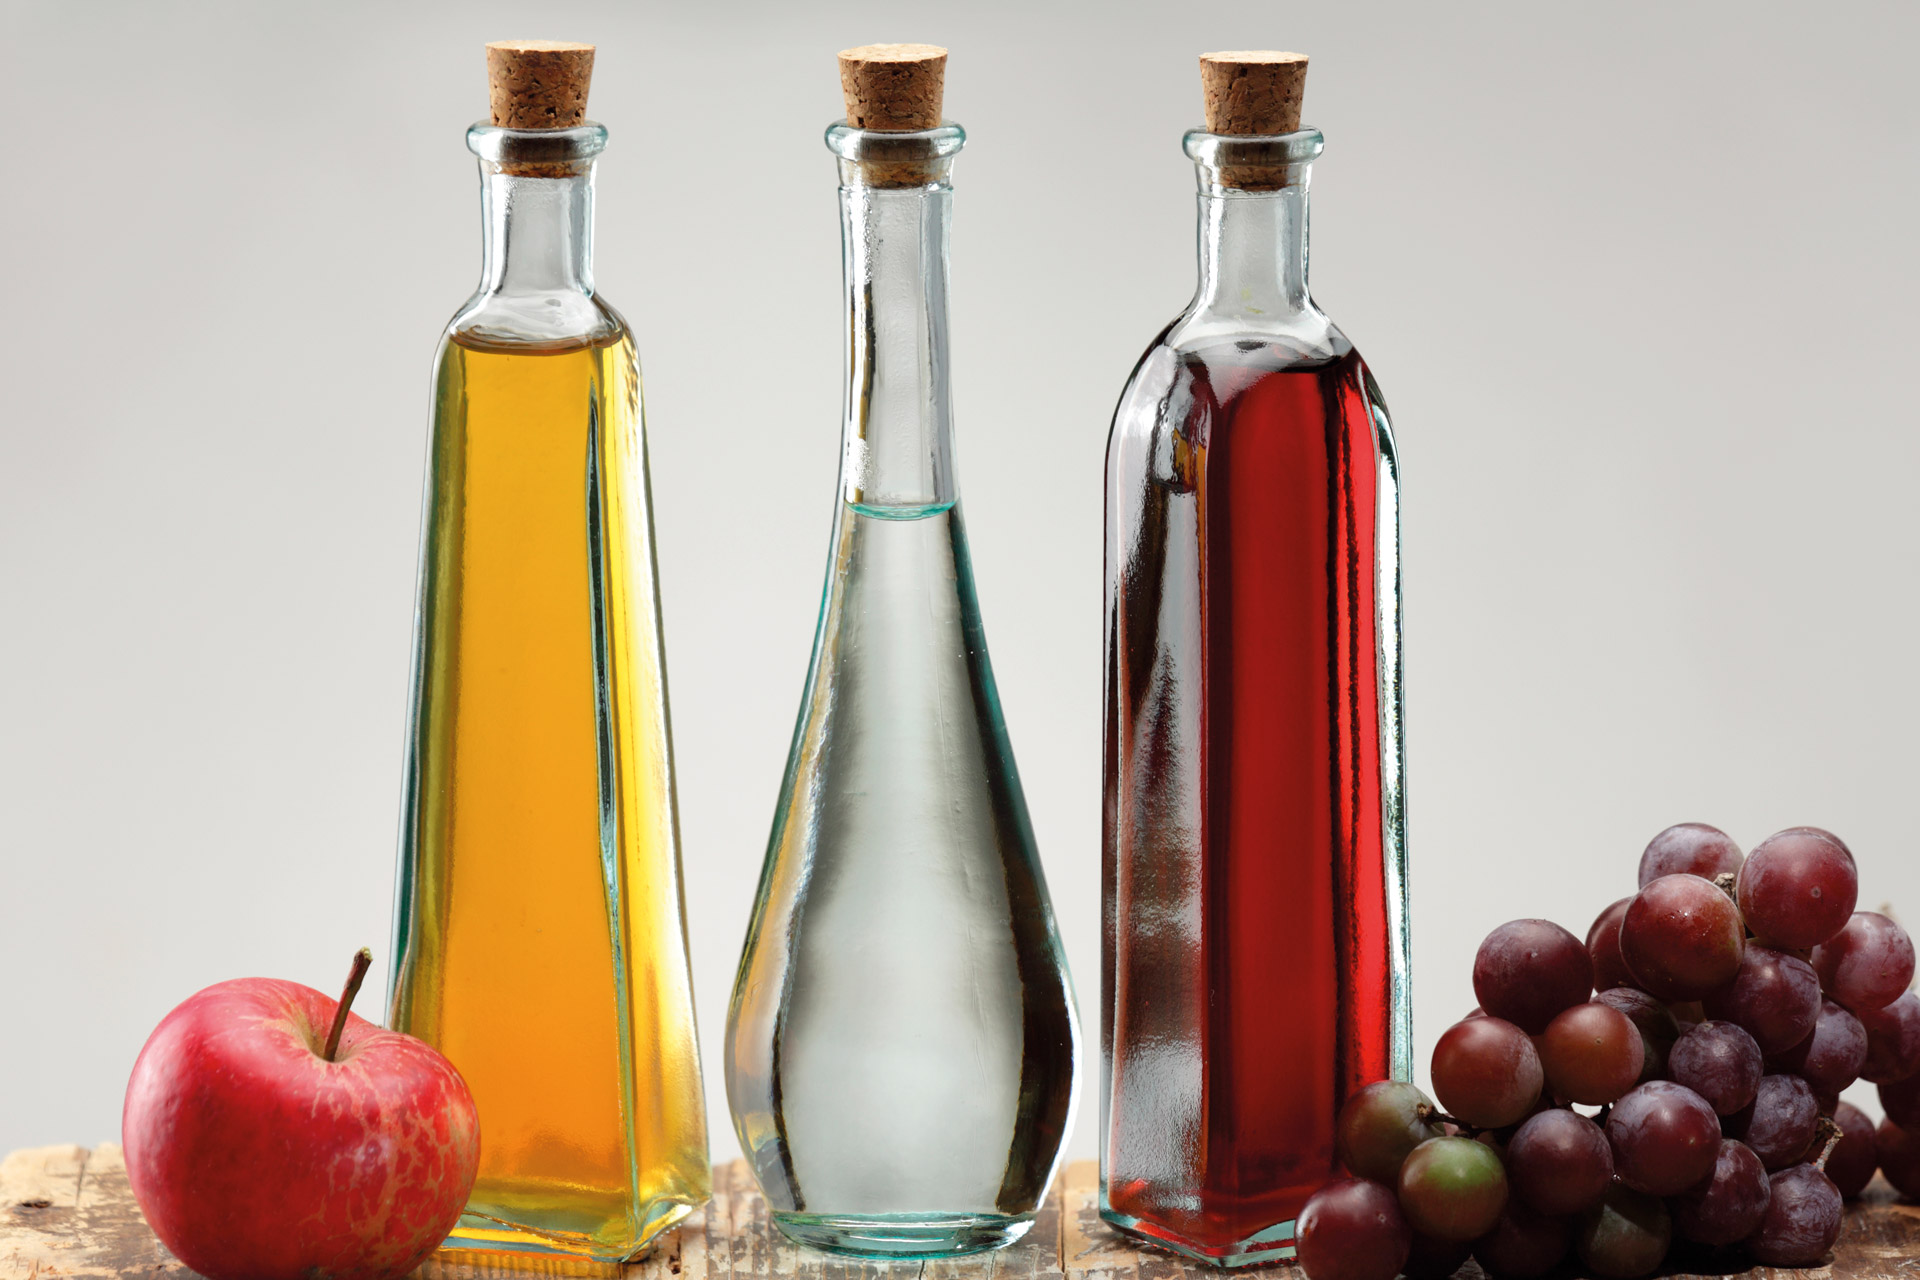 TREND-SETTING SOLUTIONS FOR VINEGAR PRODUCTION